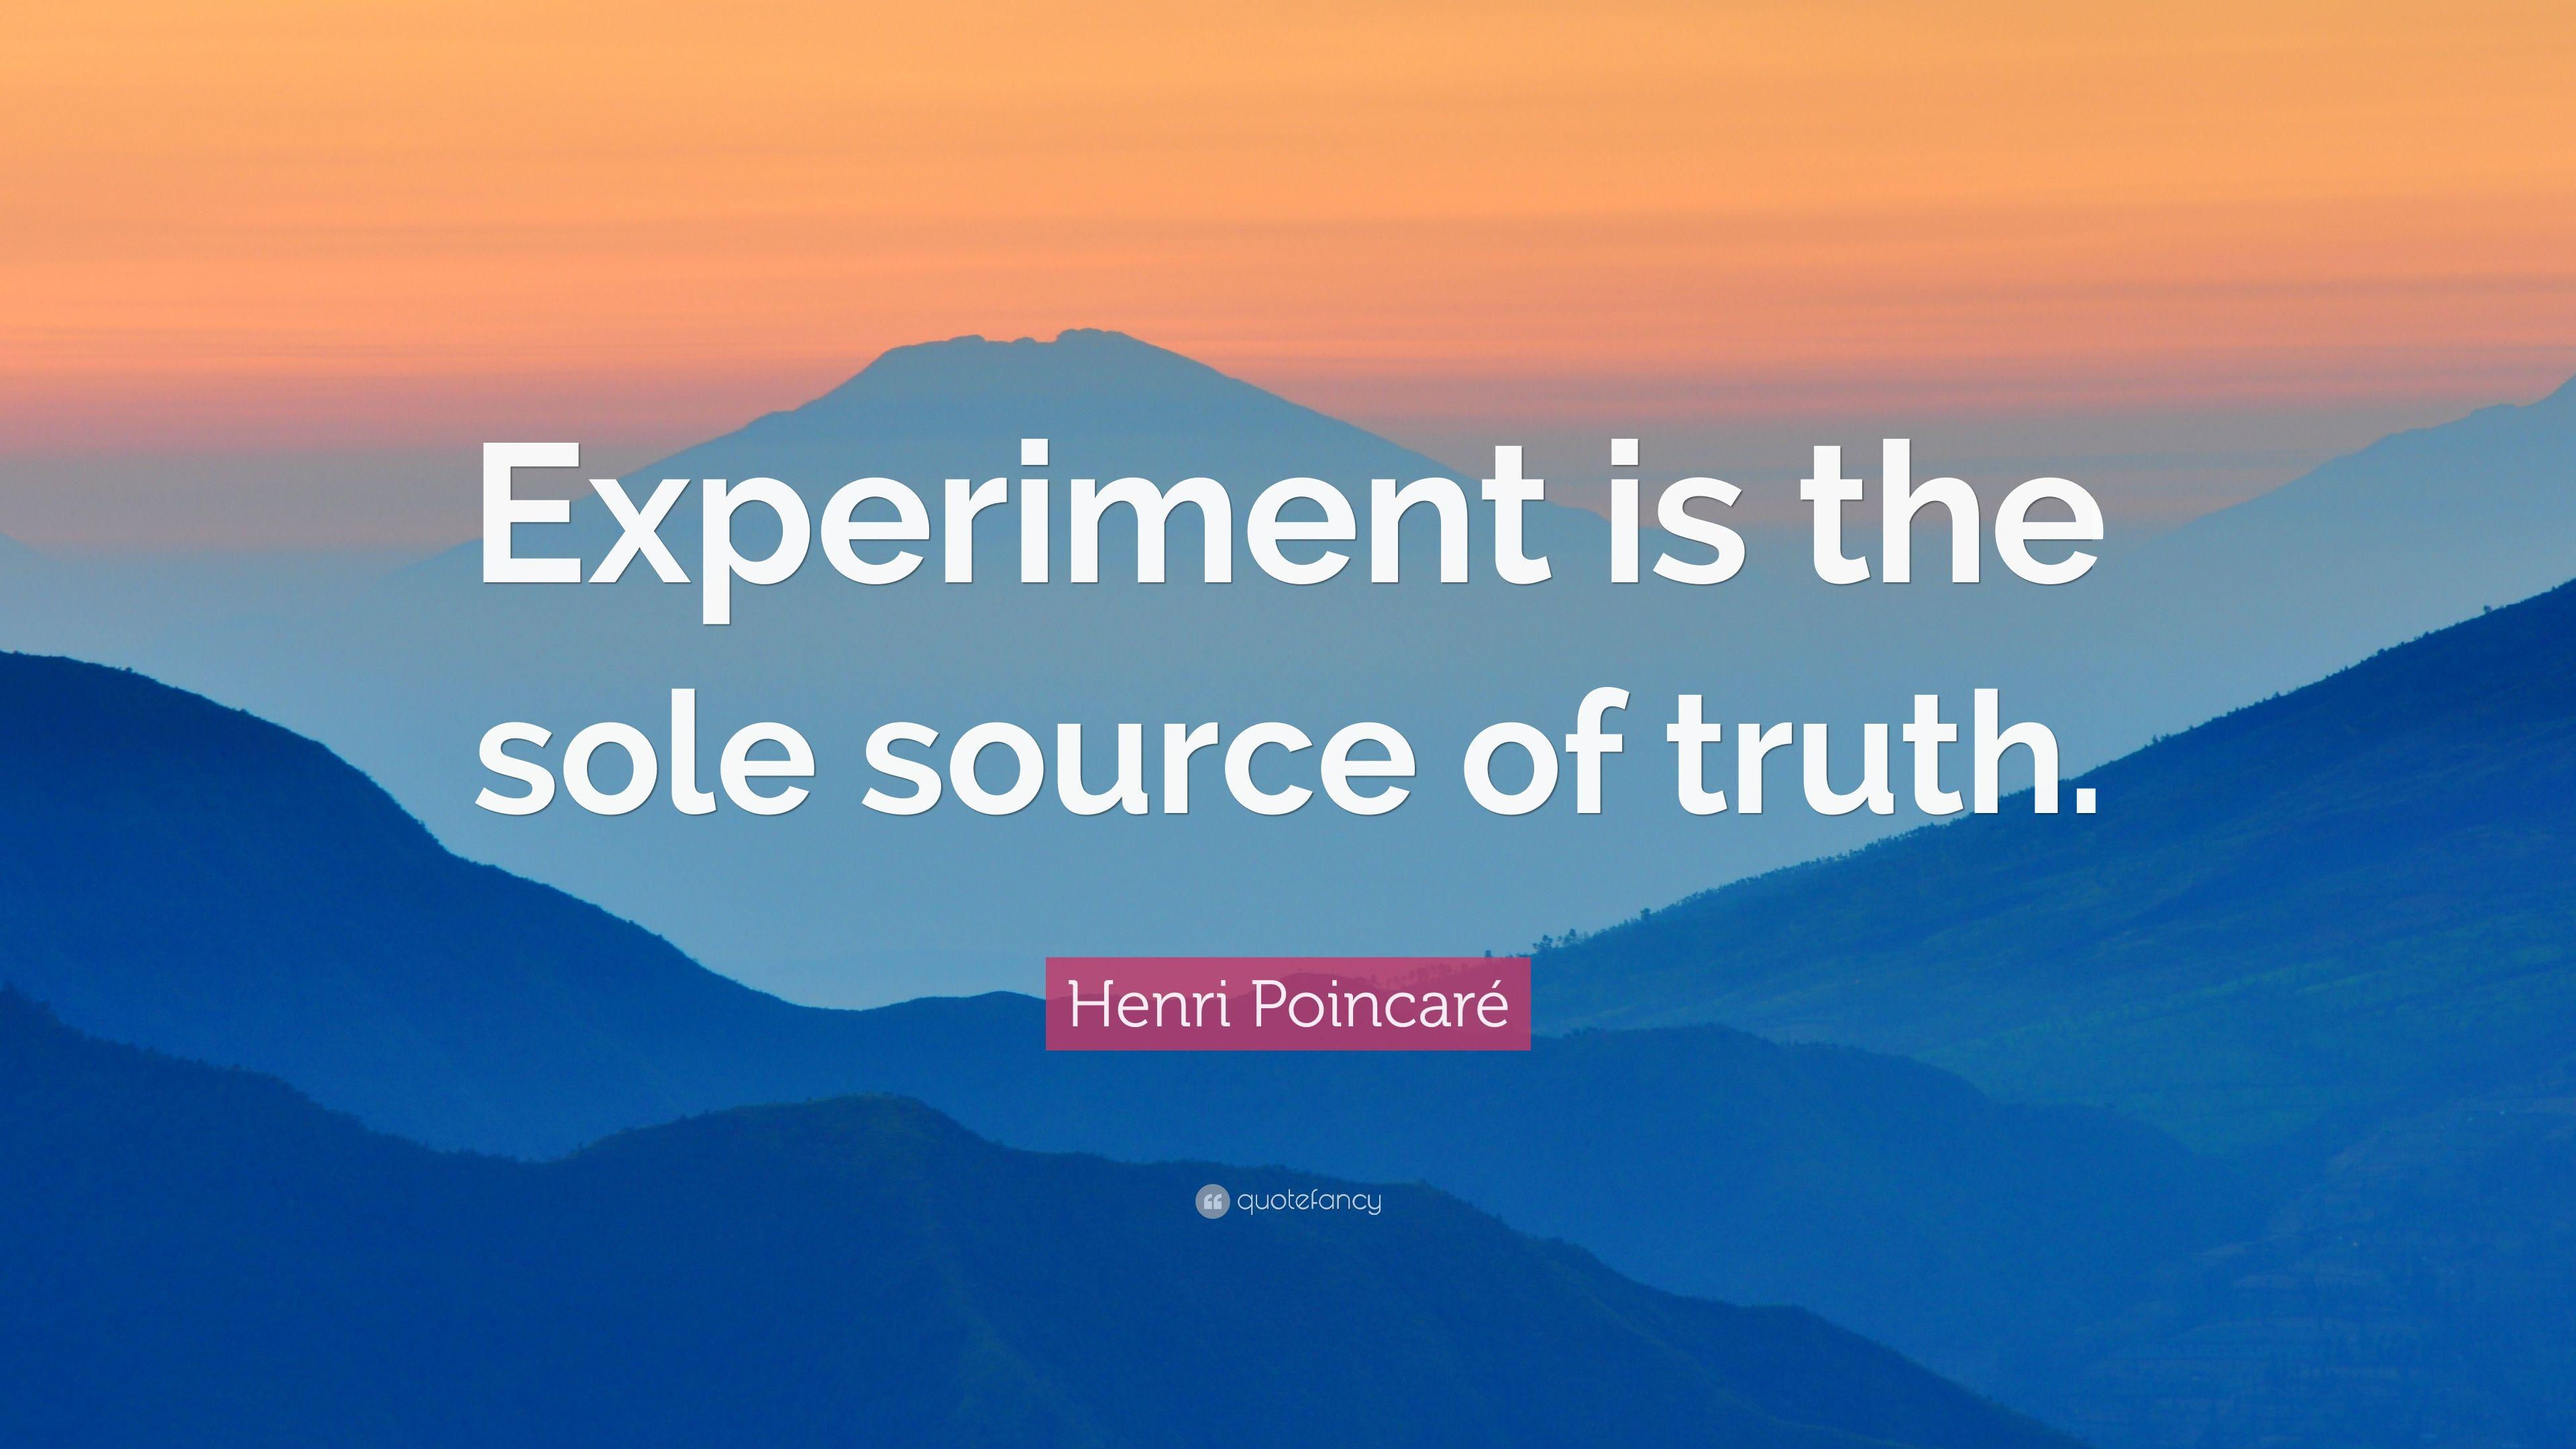 Henri Poincaré Quote: “Experiment is the sole source of truth.” 10